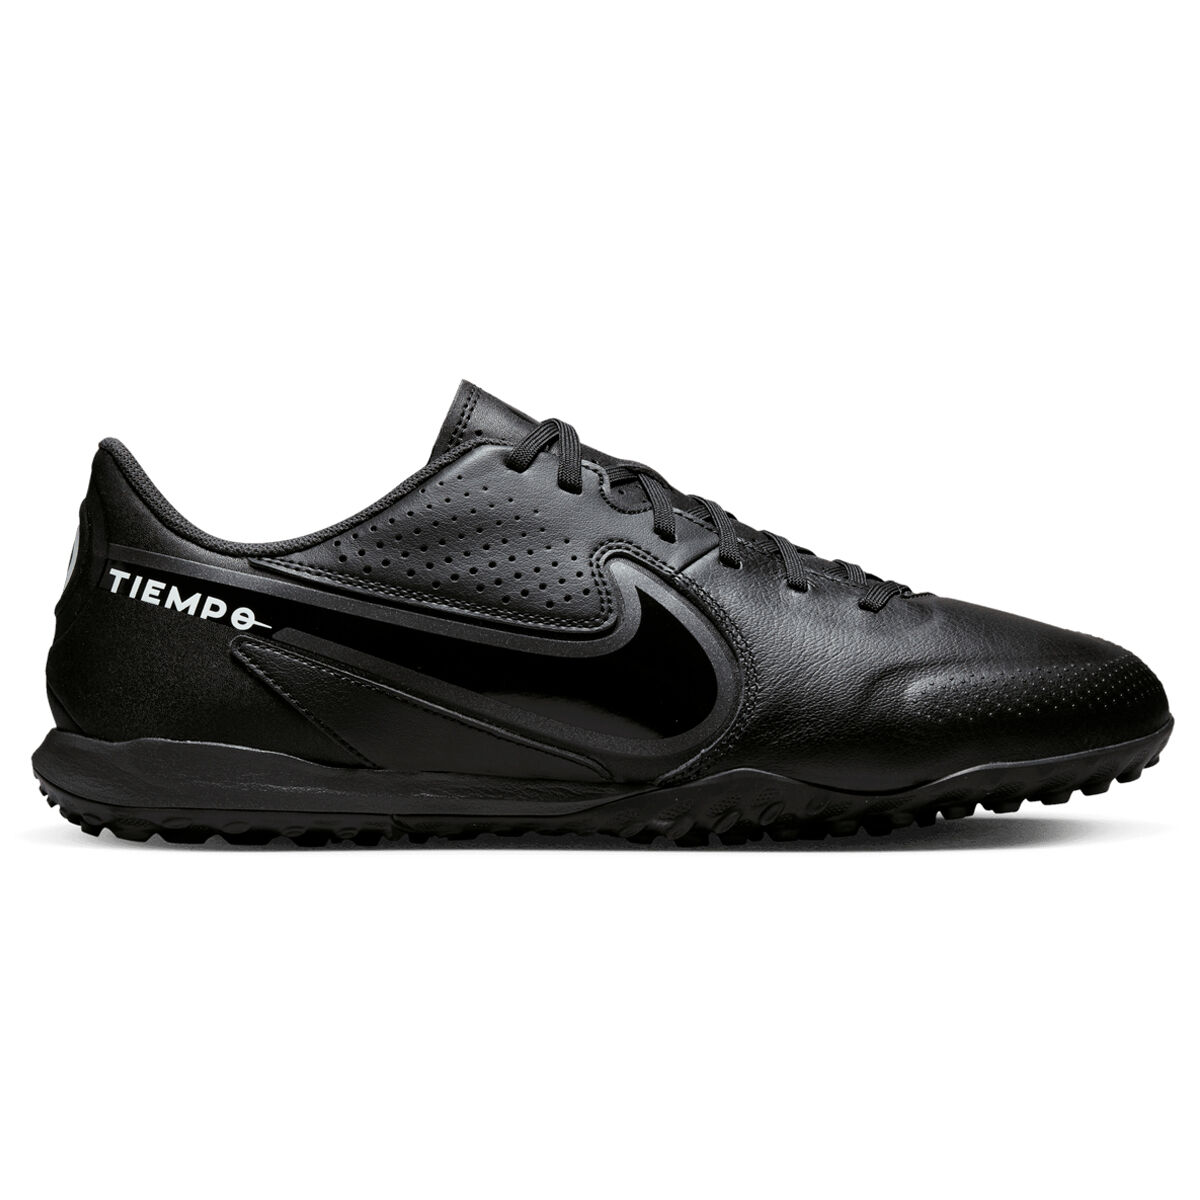 Touch & Turf Football Boots - Indoor Soccer Shoes - rebel